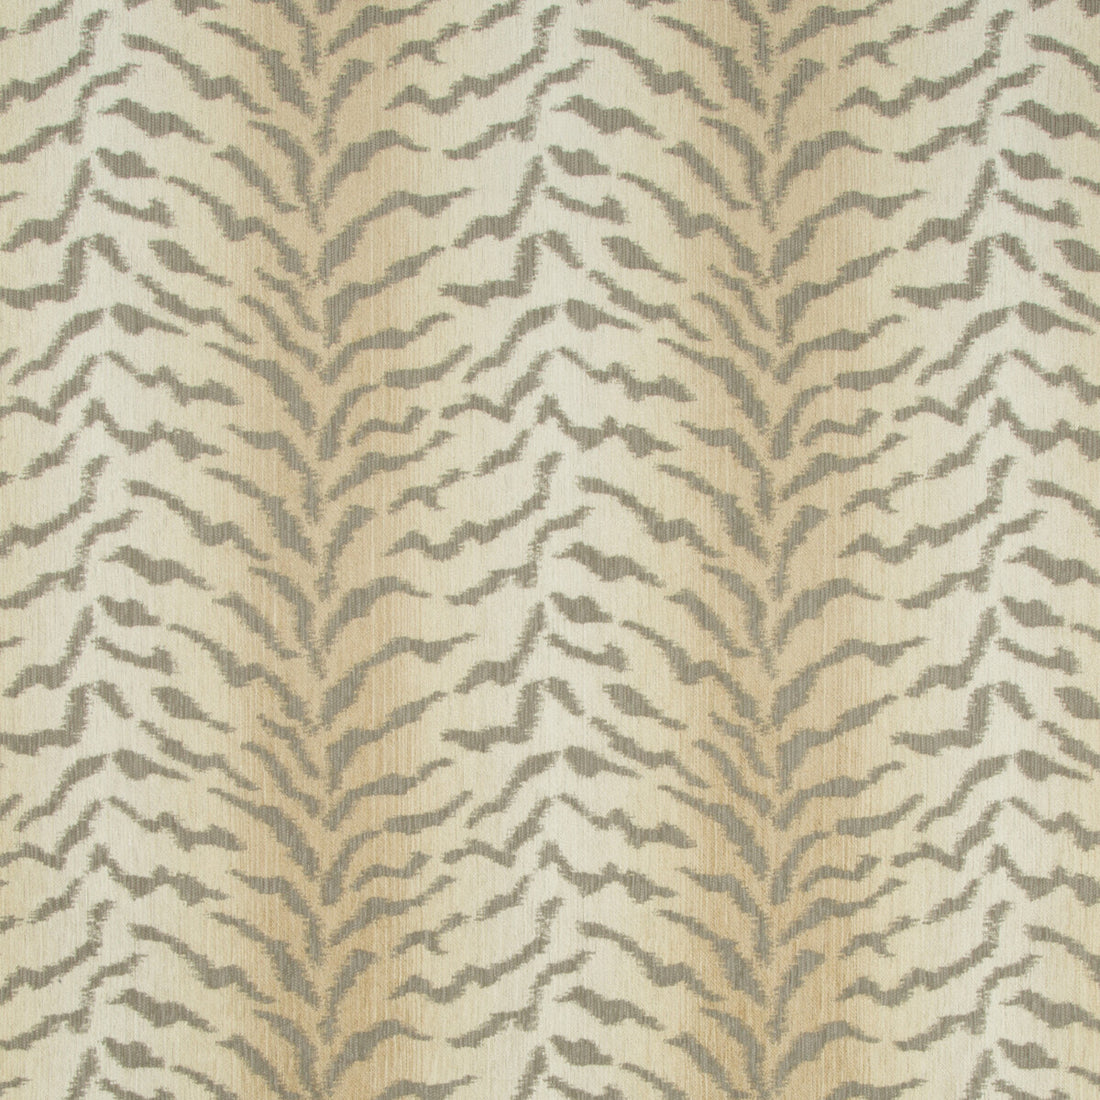 Kravet Design fabric in 35010-11 color - pattern 35010.11.0 - by Kravet Design in the Performance Crypton Home collection